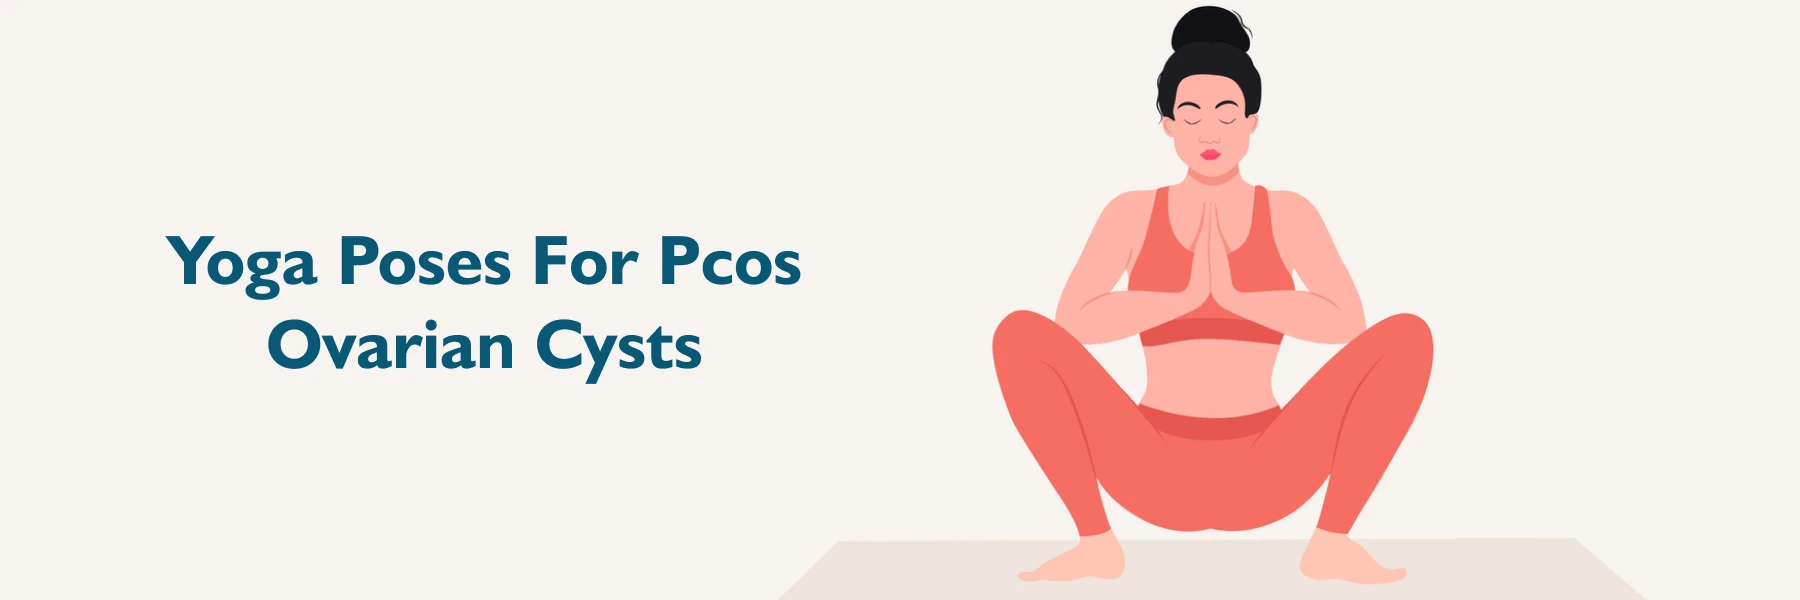 Yoga Poses to Treat Ovarian Cysts and PCOS